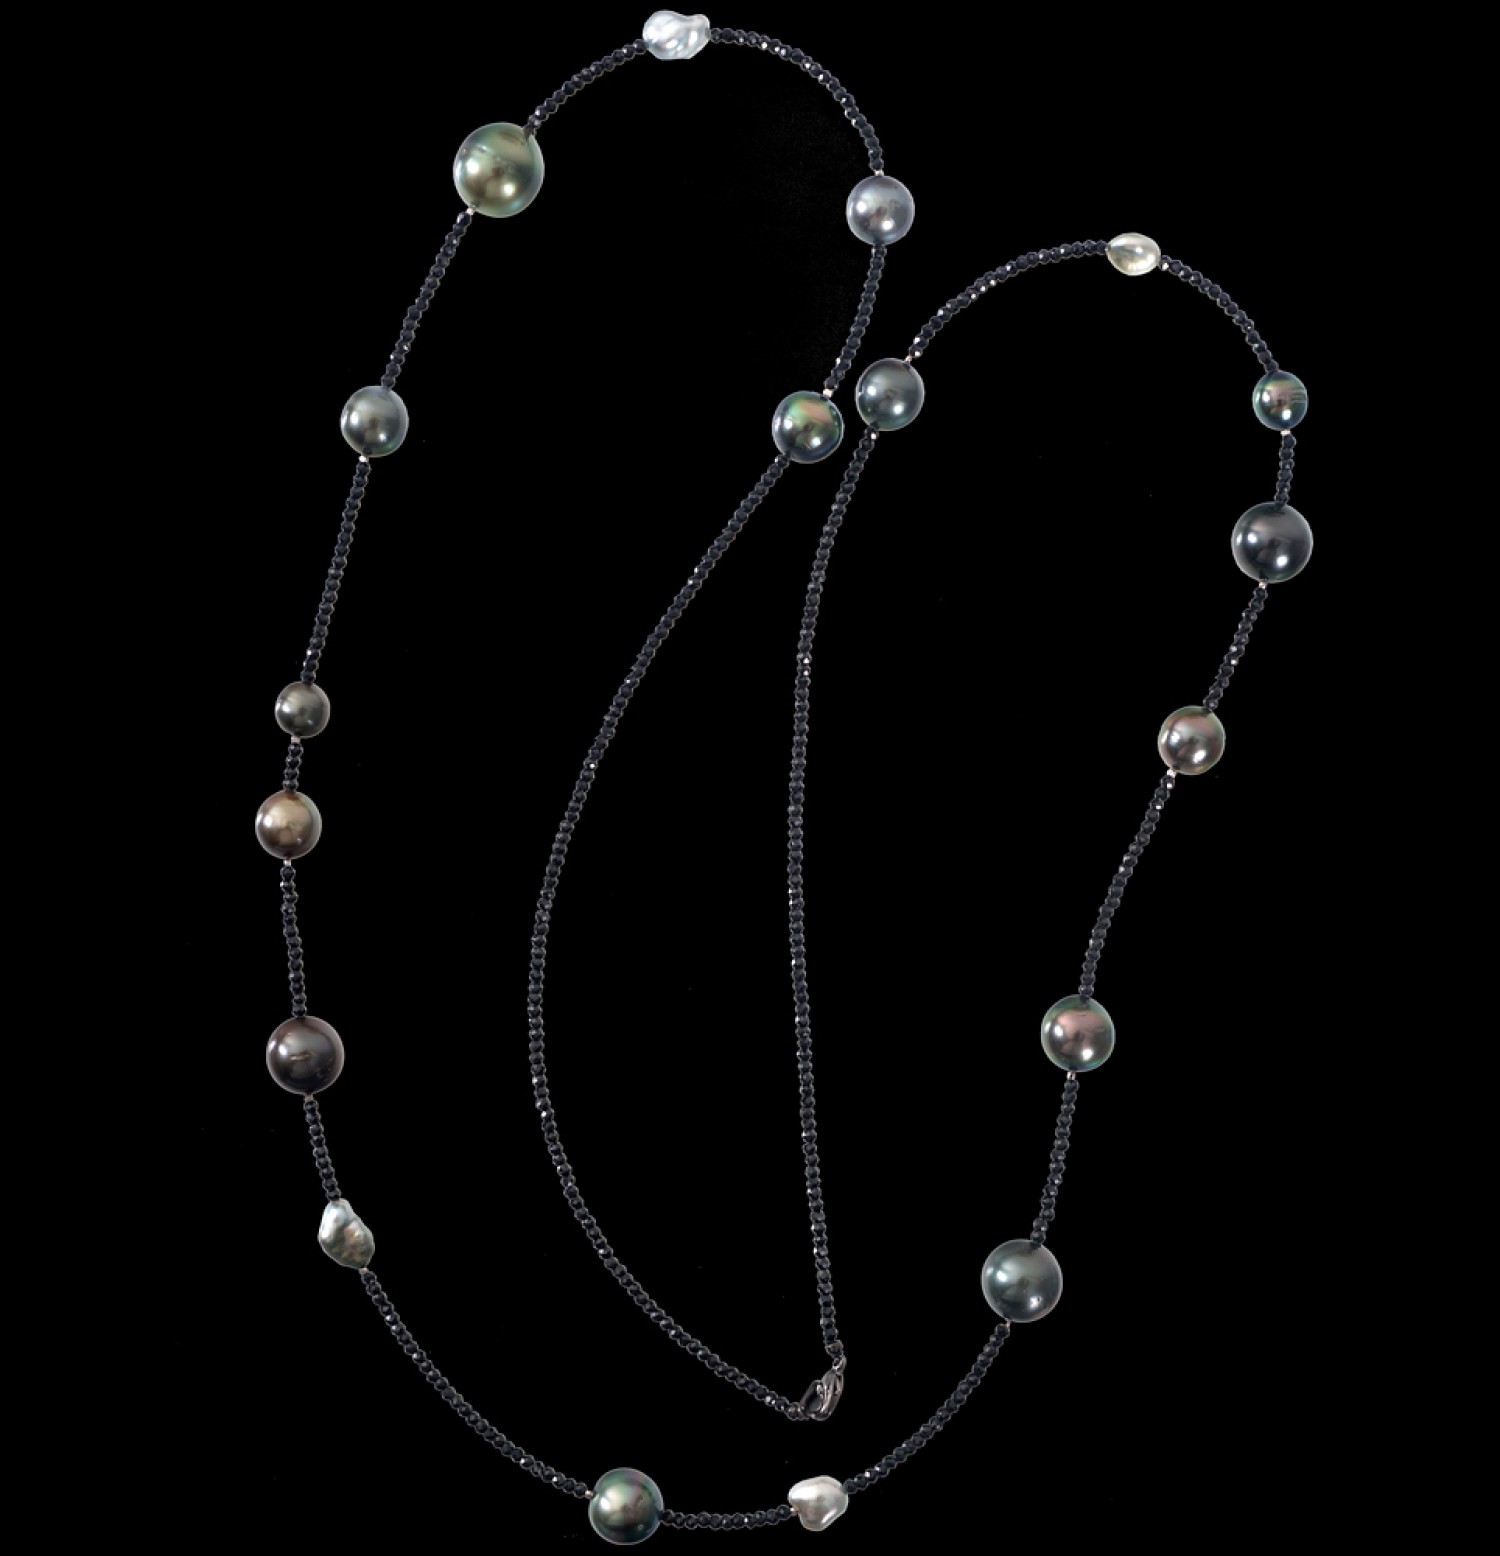 Antique Jewellery » Tahitian Pearl and Spinel Opera Length Necklace